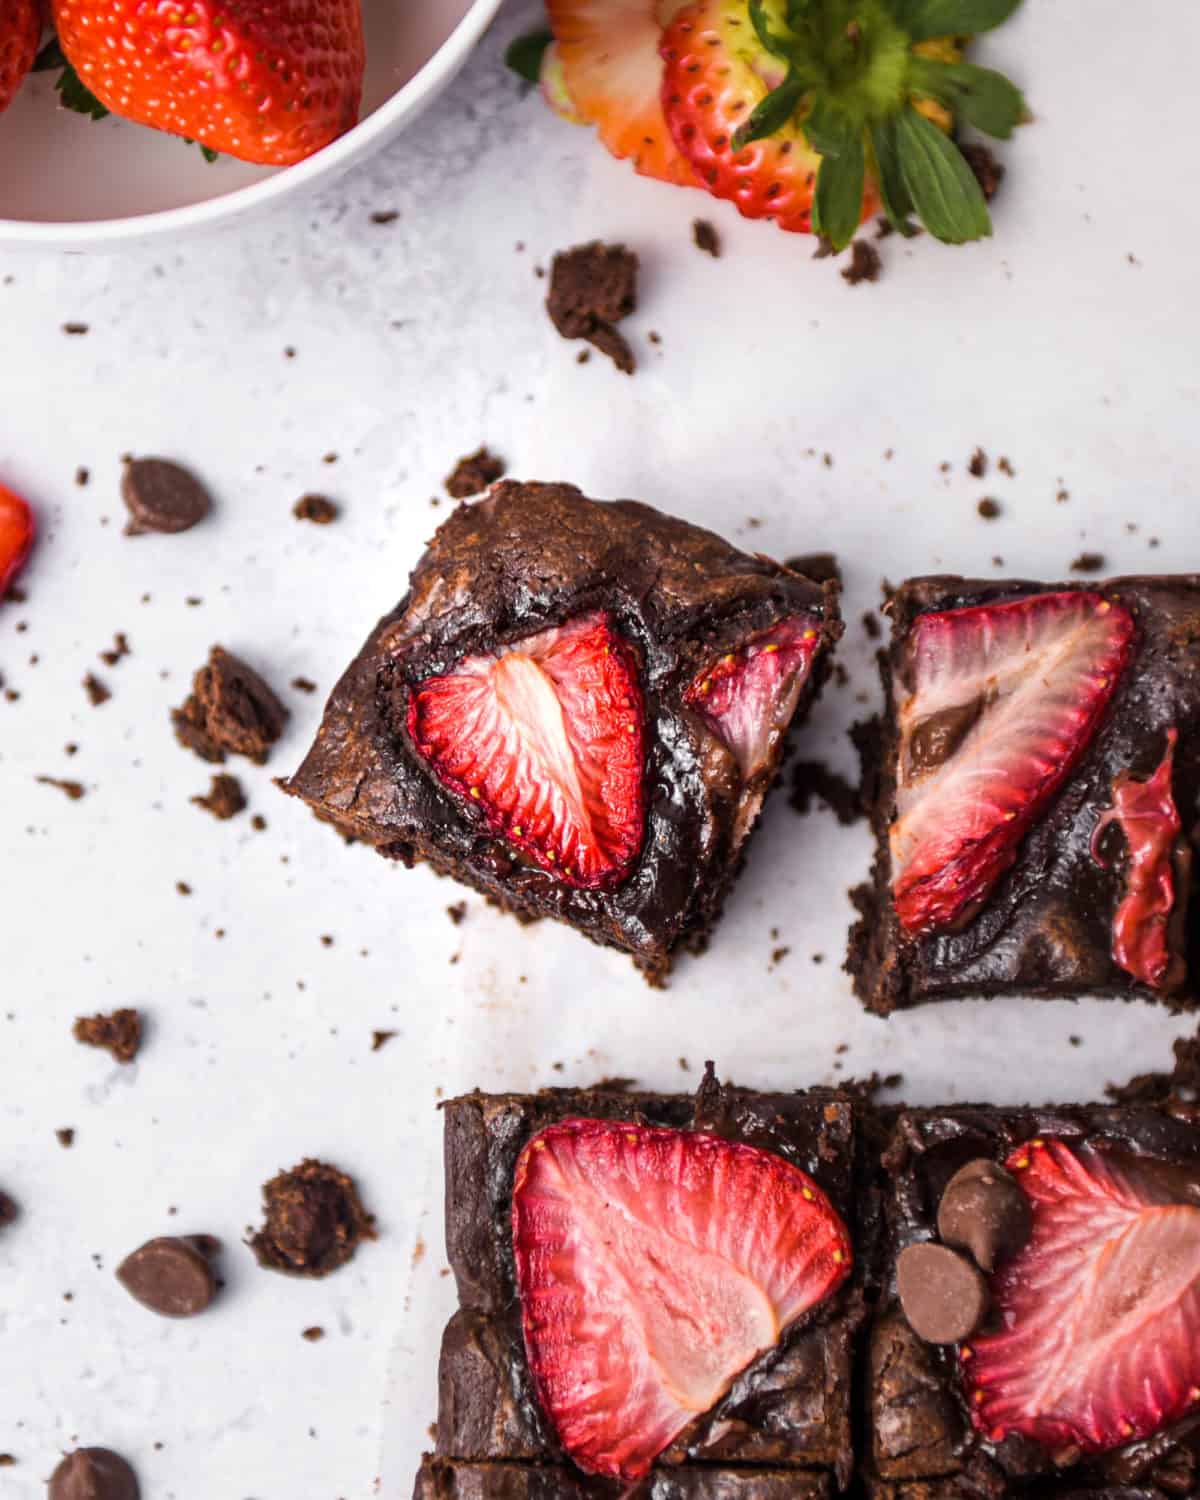 Brownies and strawberries surrounded with crumbs on a table.